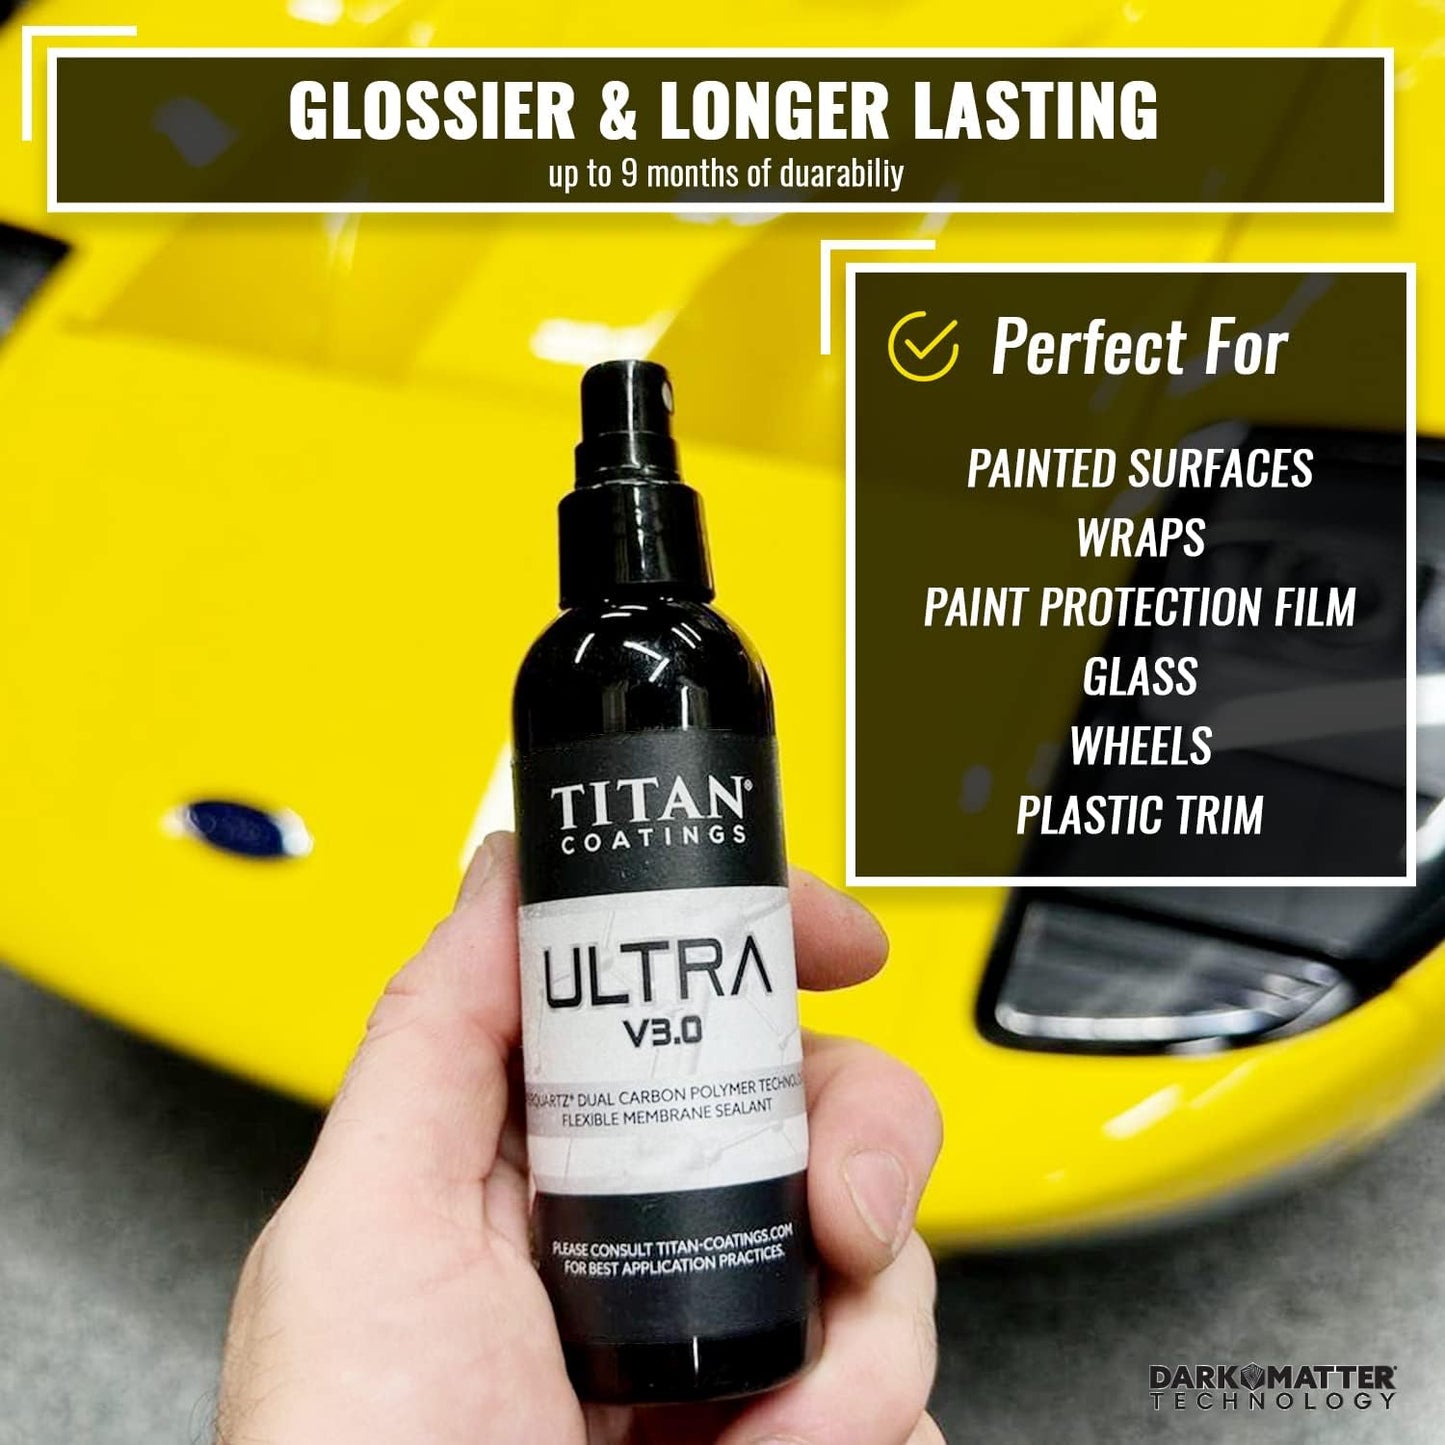 Dark Matter Ultra (Elastomer) Ceramic Coating - Extreme Gloss and Shine - Extrem Hydrophobic & Slickness - Long Lasting Professional Results - Easy Application - One of its kind Tech!